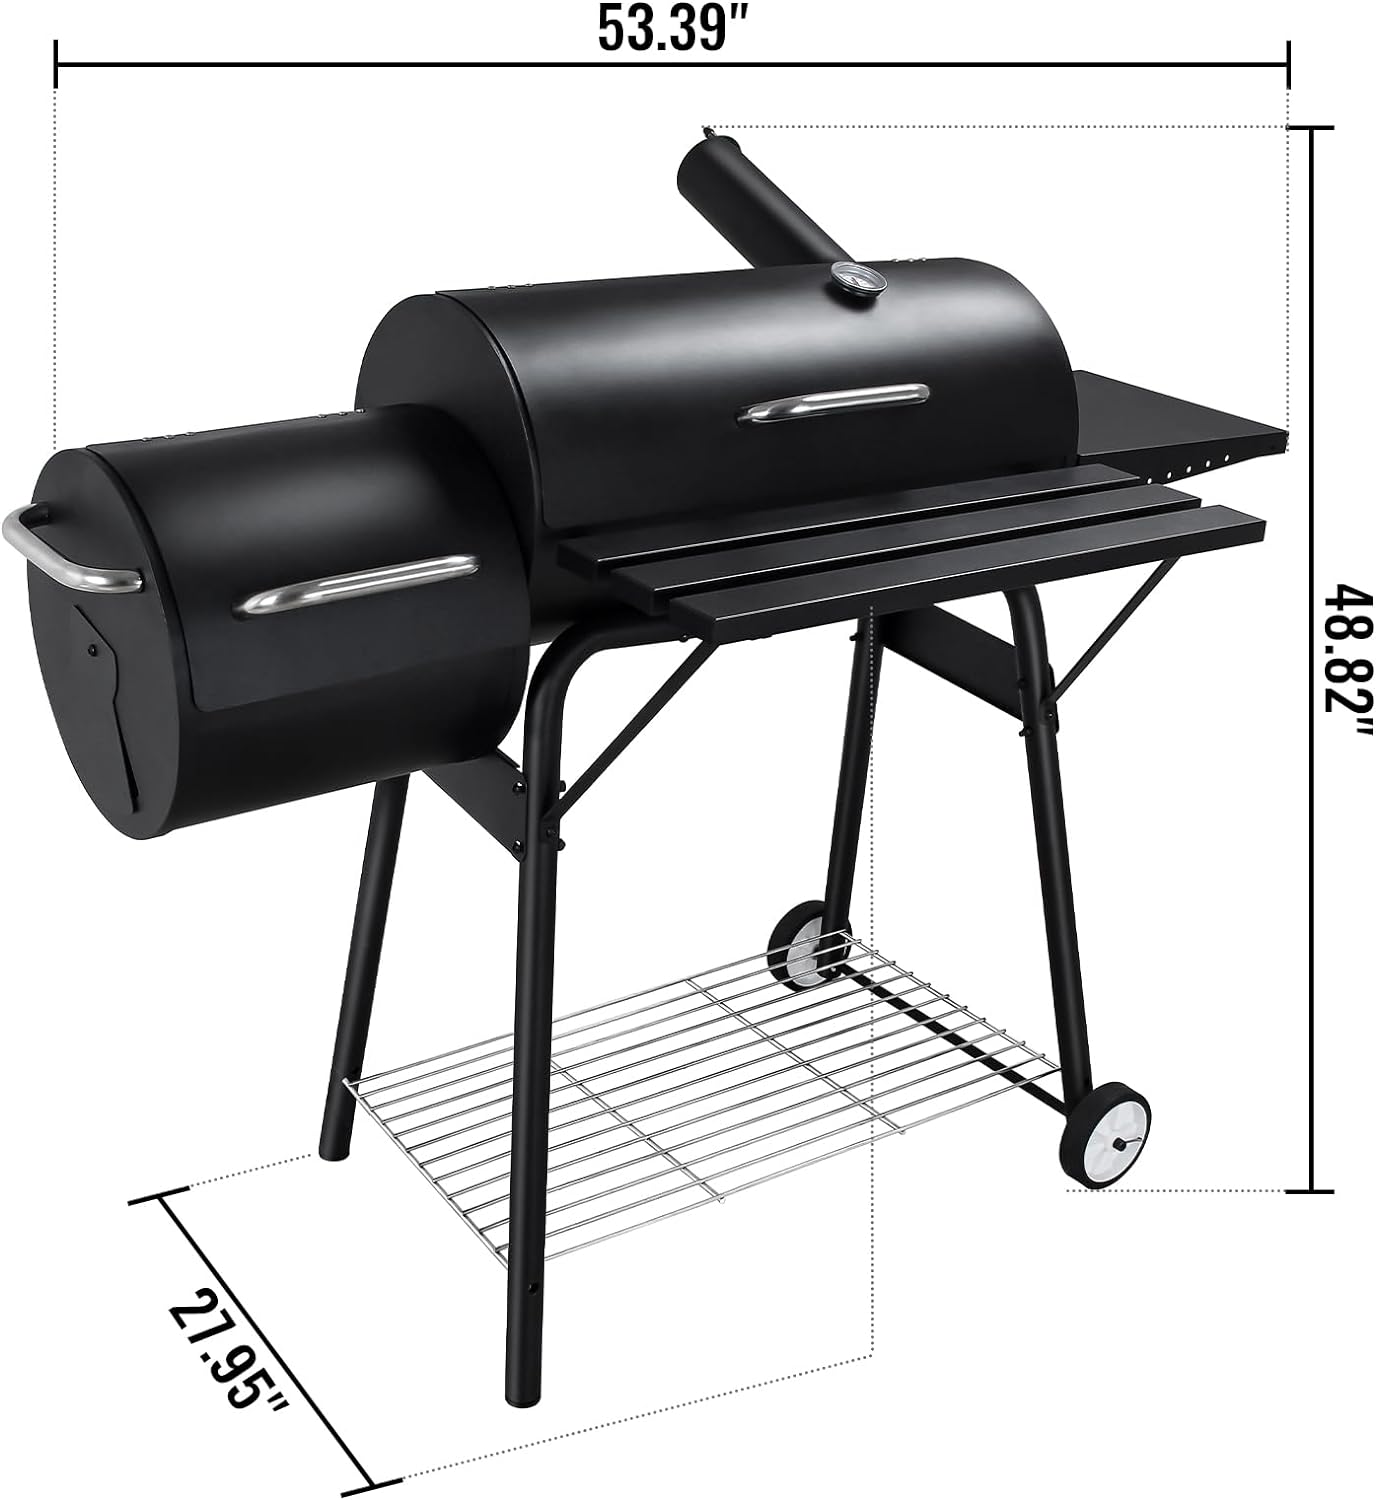 Outdoor BBQ Grill Review